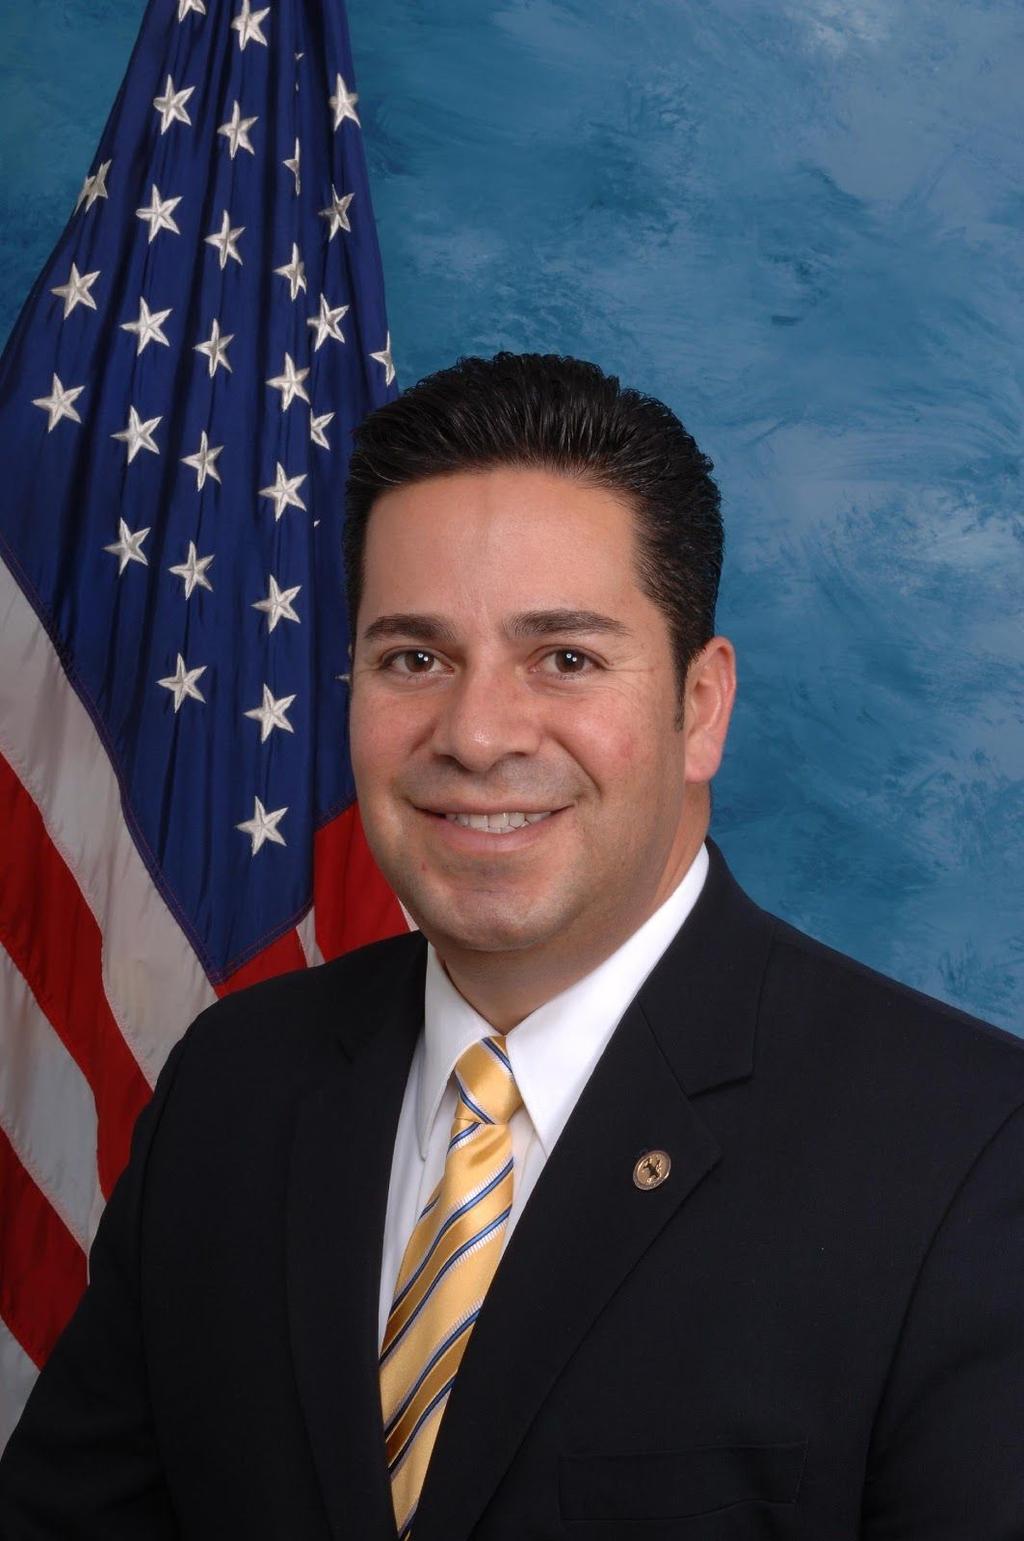 New Mexico Representative Ben Lujan Democrat 3 rd District (@repbenraylujan) 2231 Rayburn House Office Building 202-225-6190 New Mexico Current Volunteers: 50 (New Mexico Volunteers in 1967: 63)